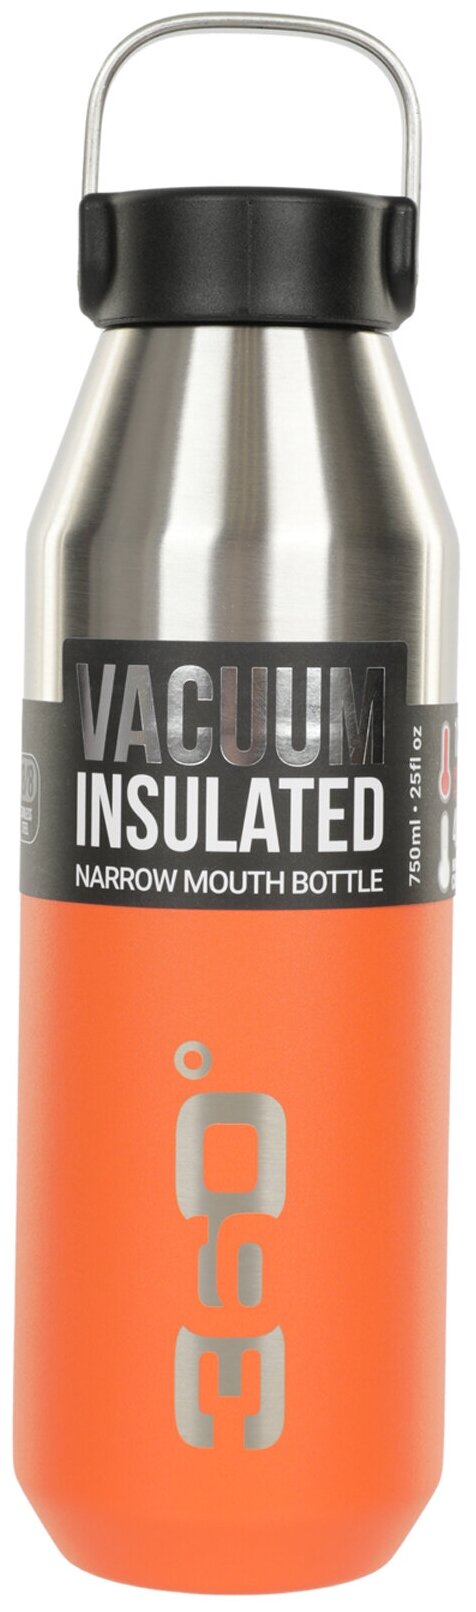 Термос 360 degrees Vacuum Insulated Stainless Narrow Mouth Bottle 750ML PM - фотография № 2